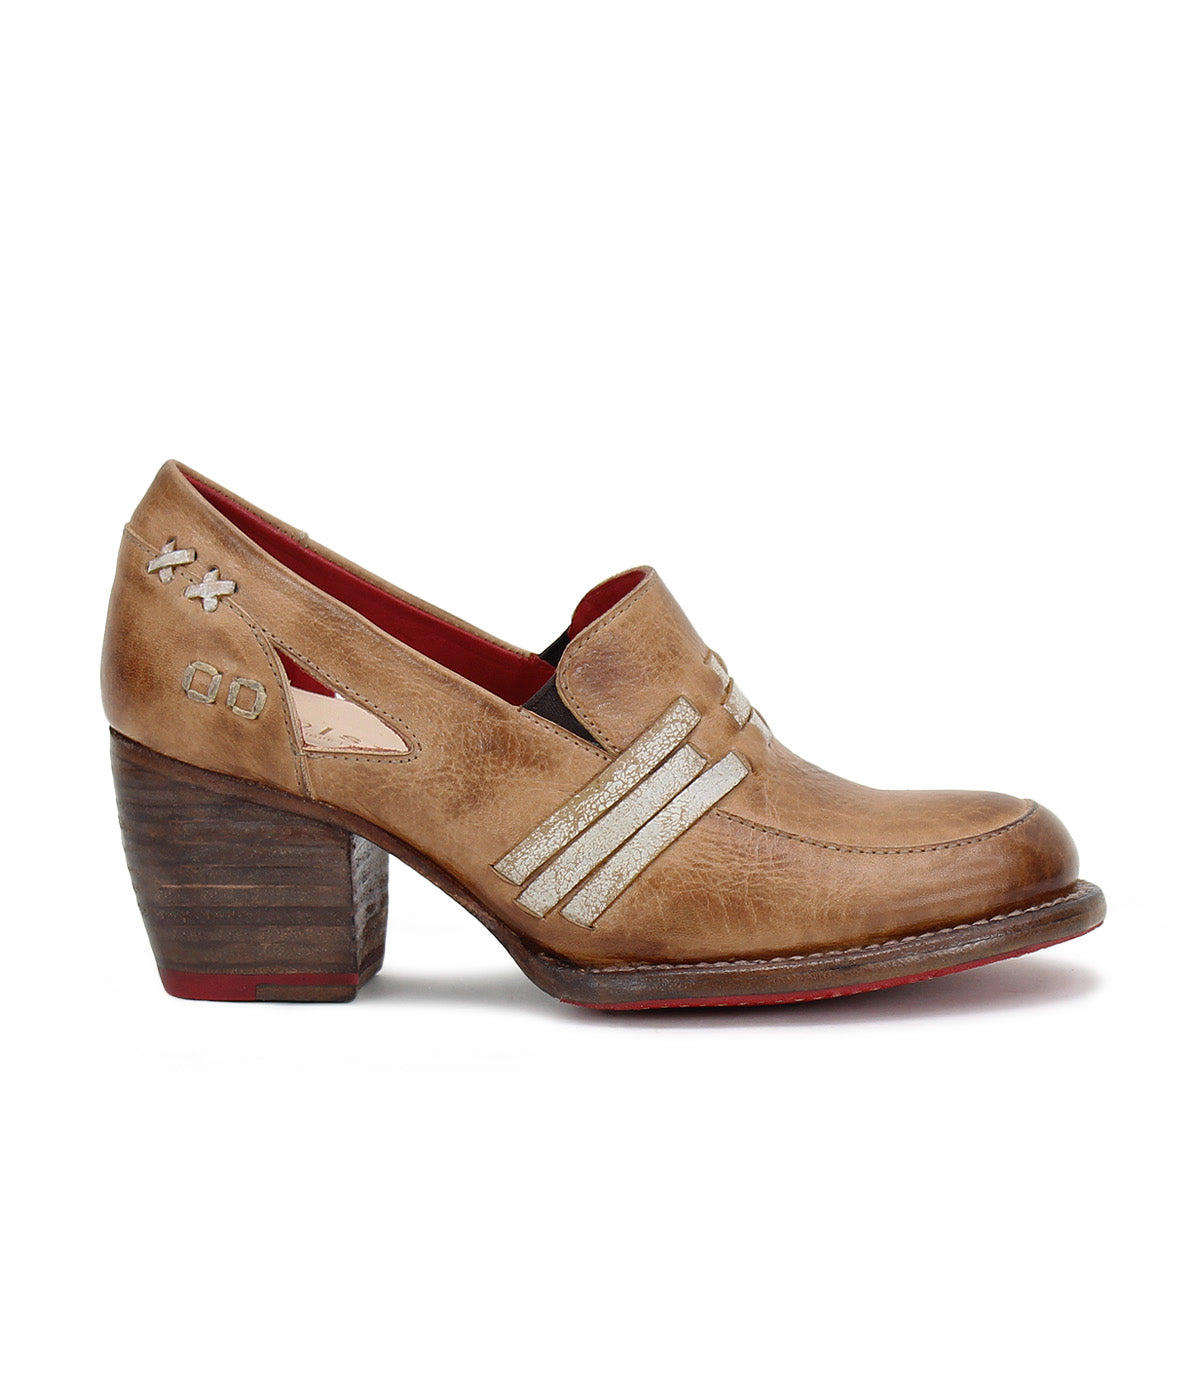 A women's Gabrianna tan leather shoe with a wooden heel by Bed Stu.